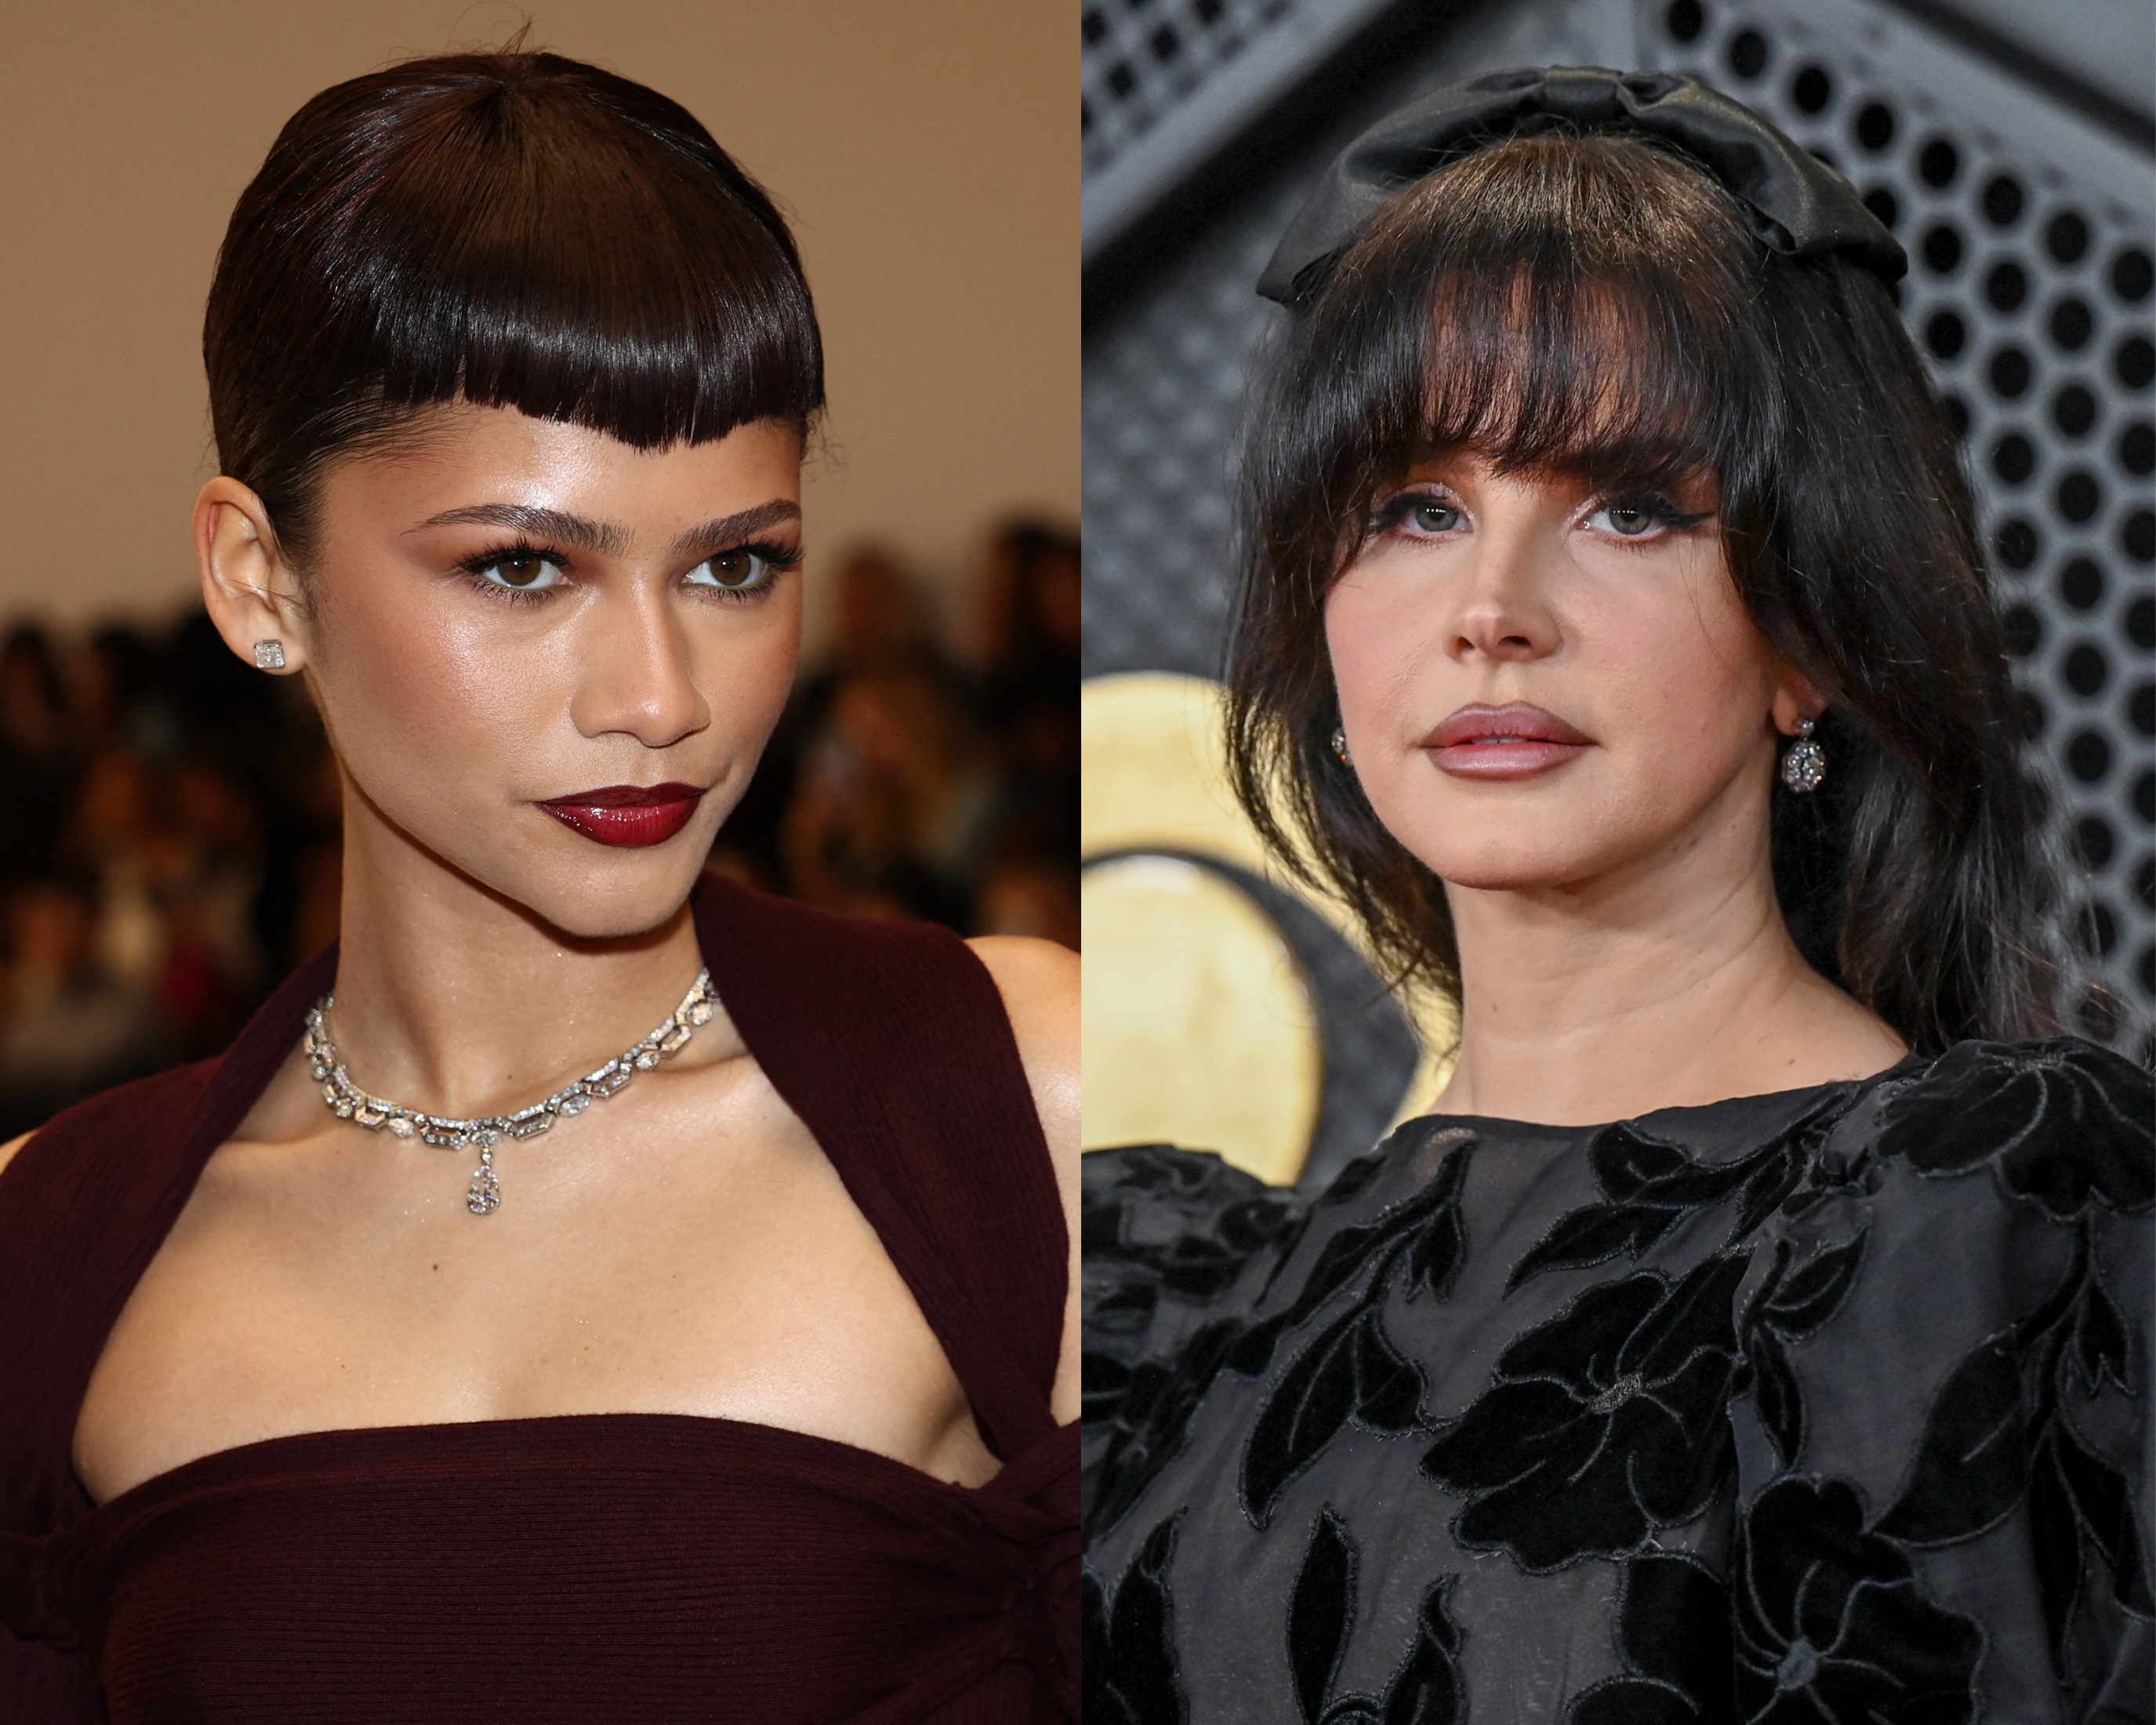 The Best Types of Bangs for Your Face Shape, According to Stylists